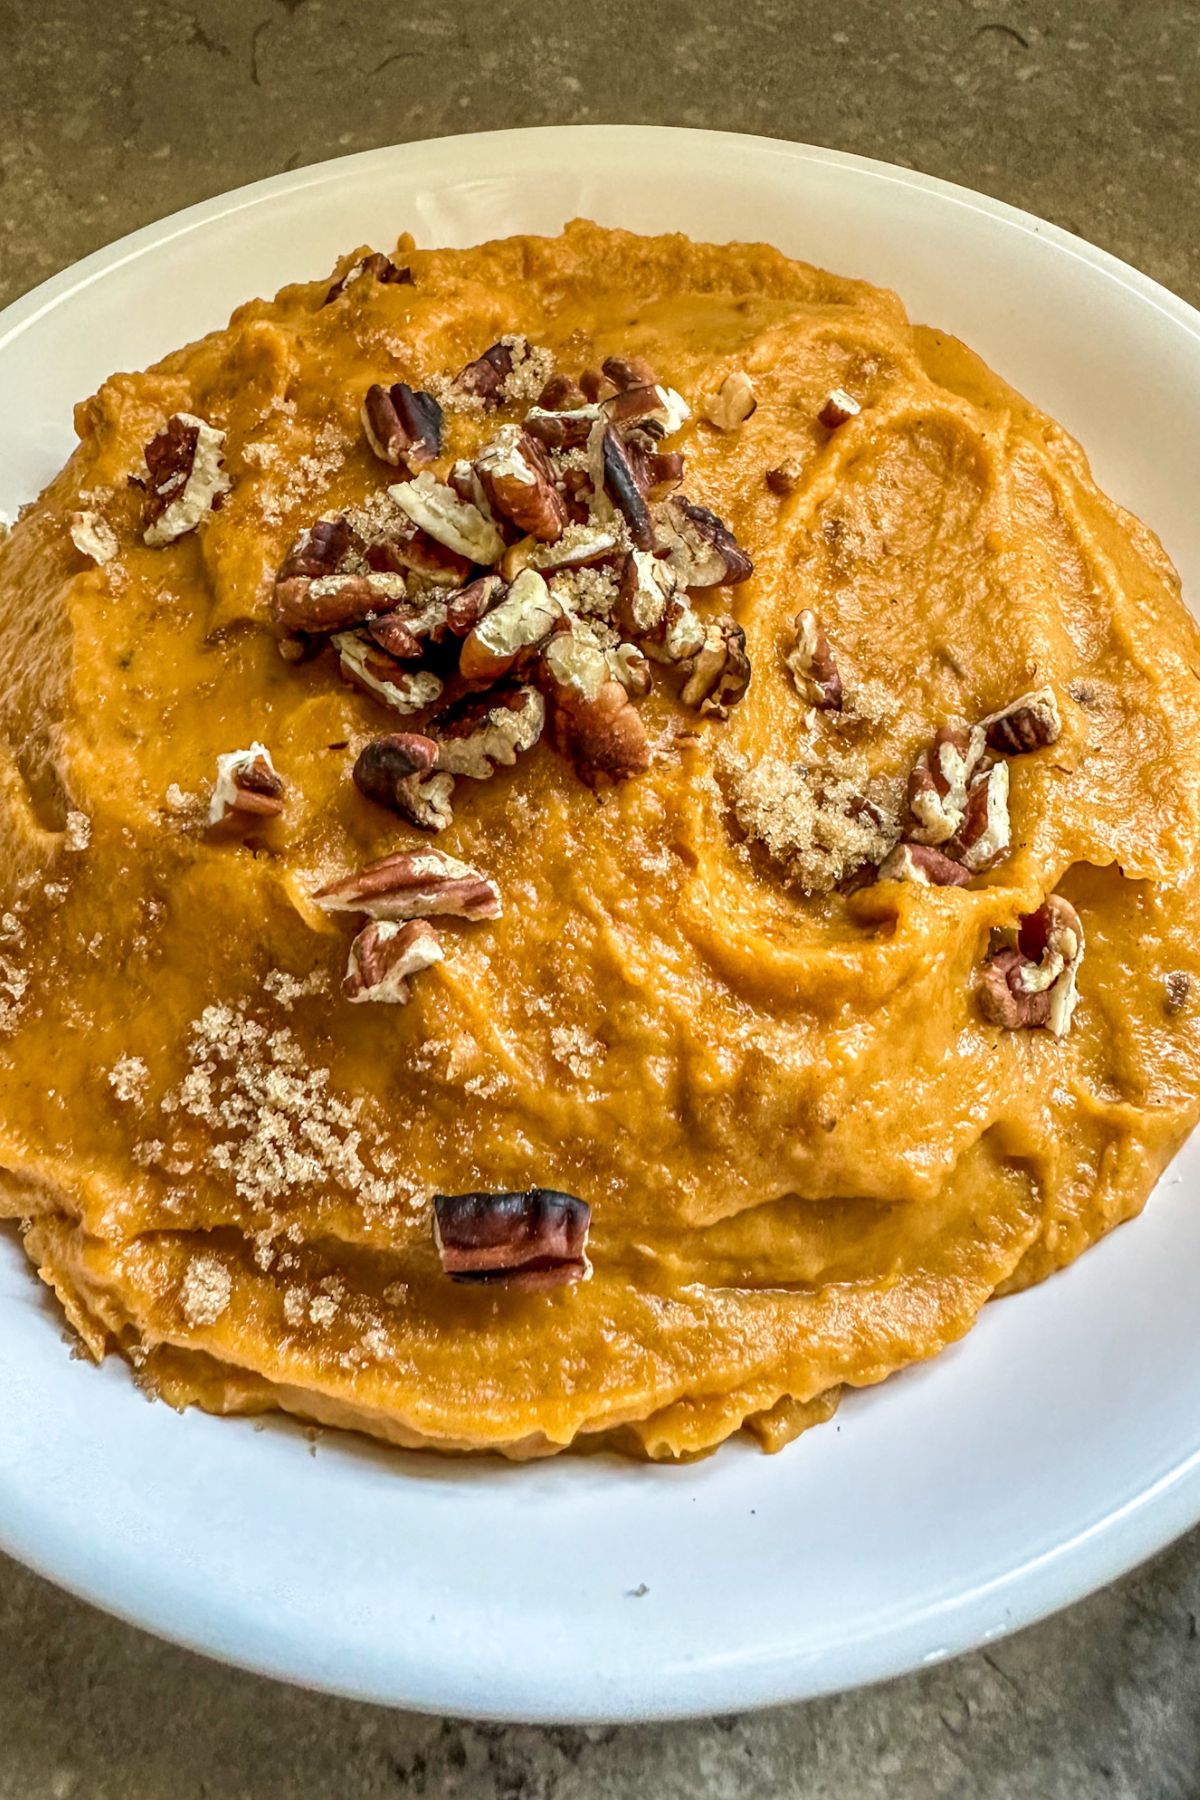 Plated sweet potatoes with pecans on top.